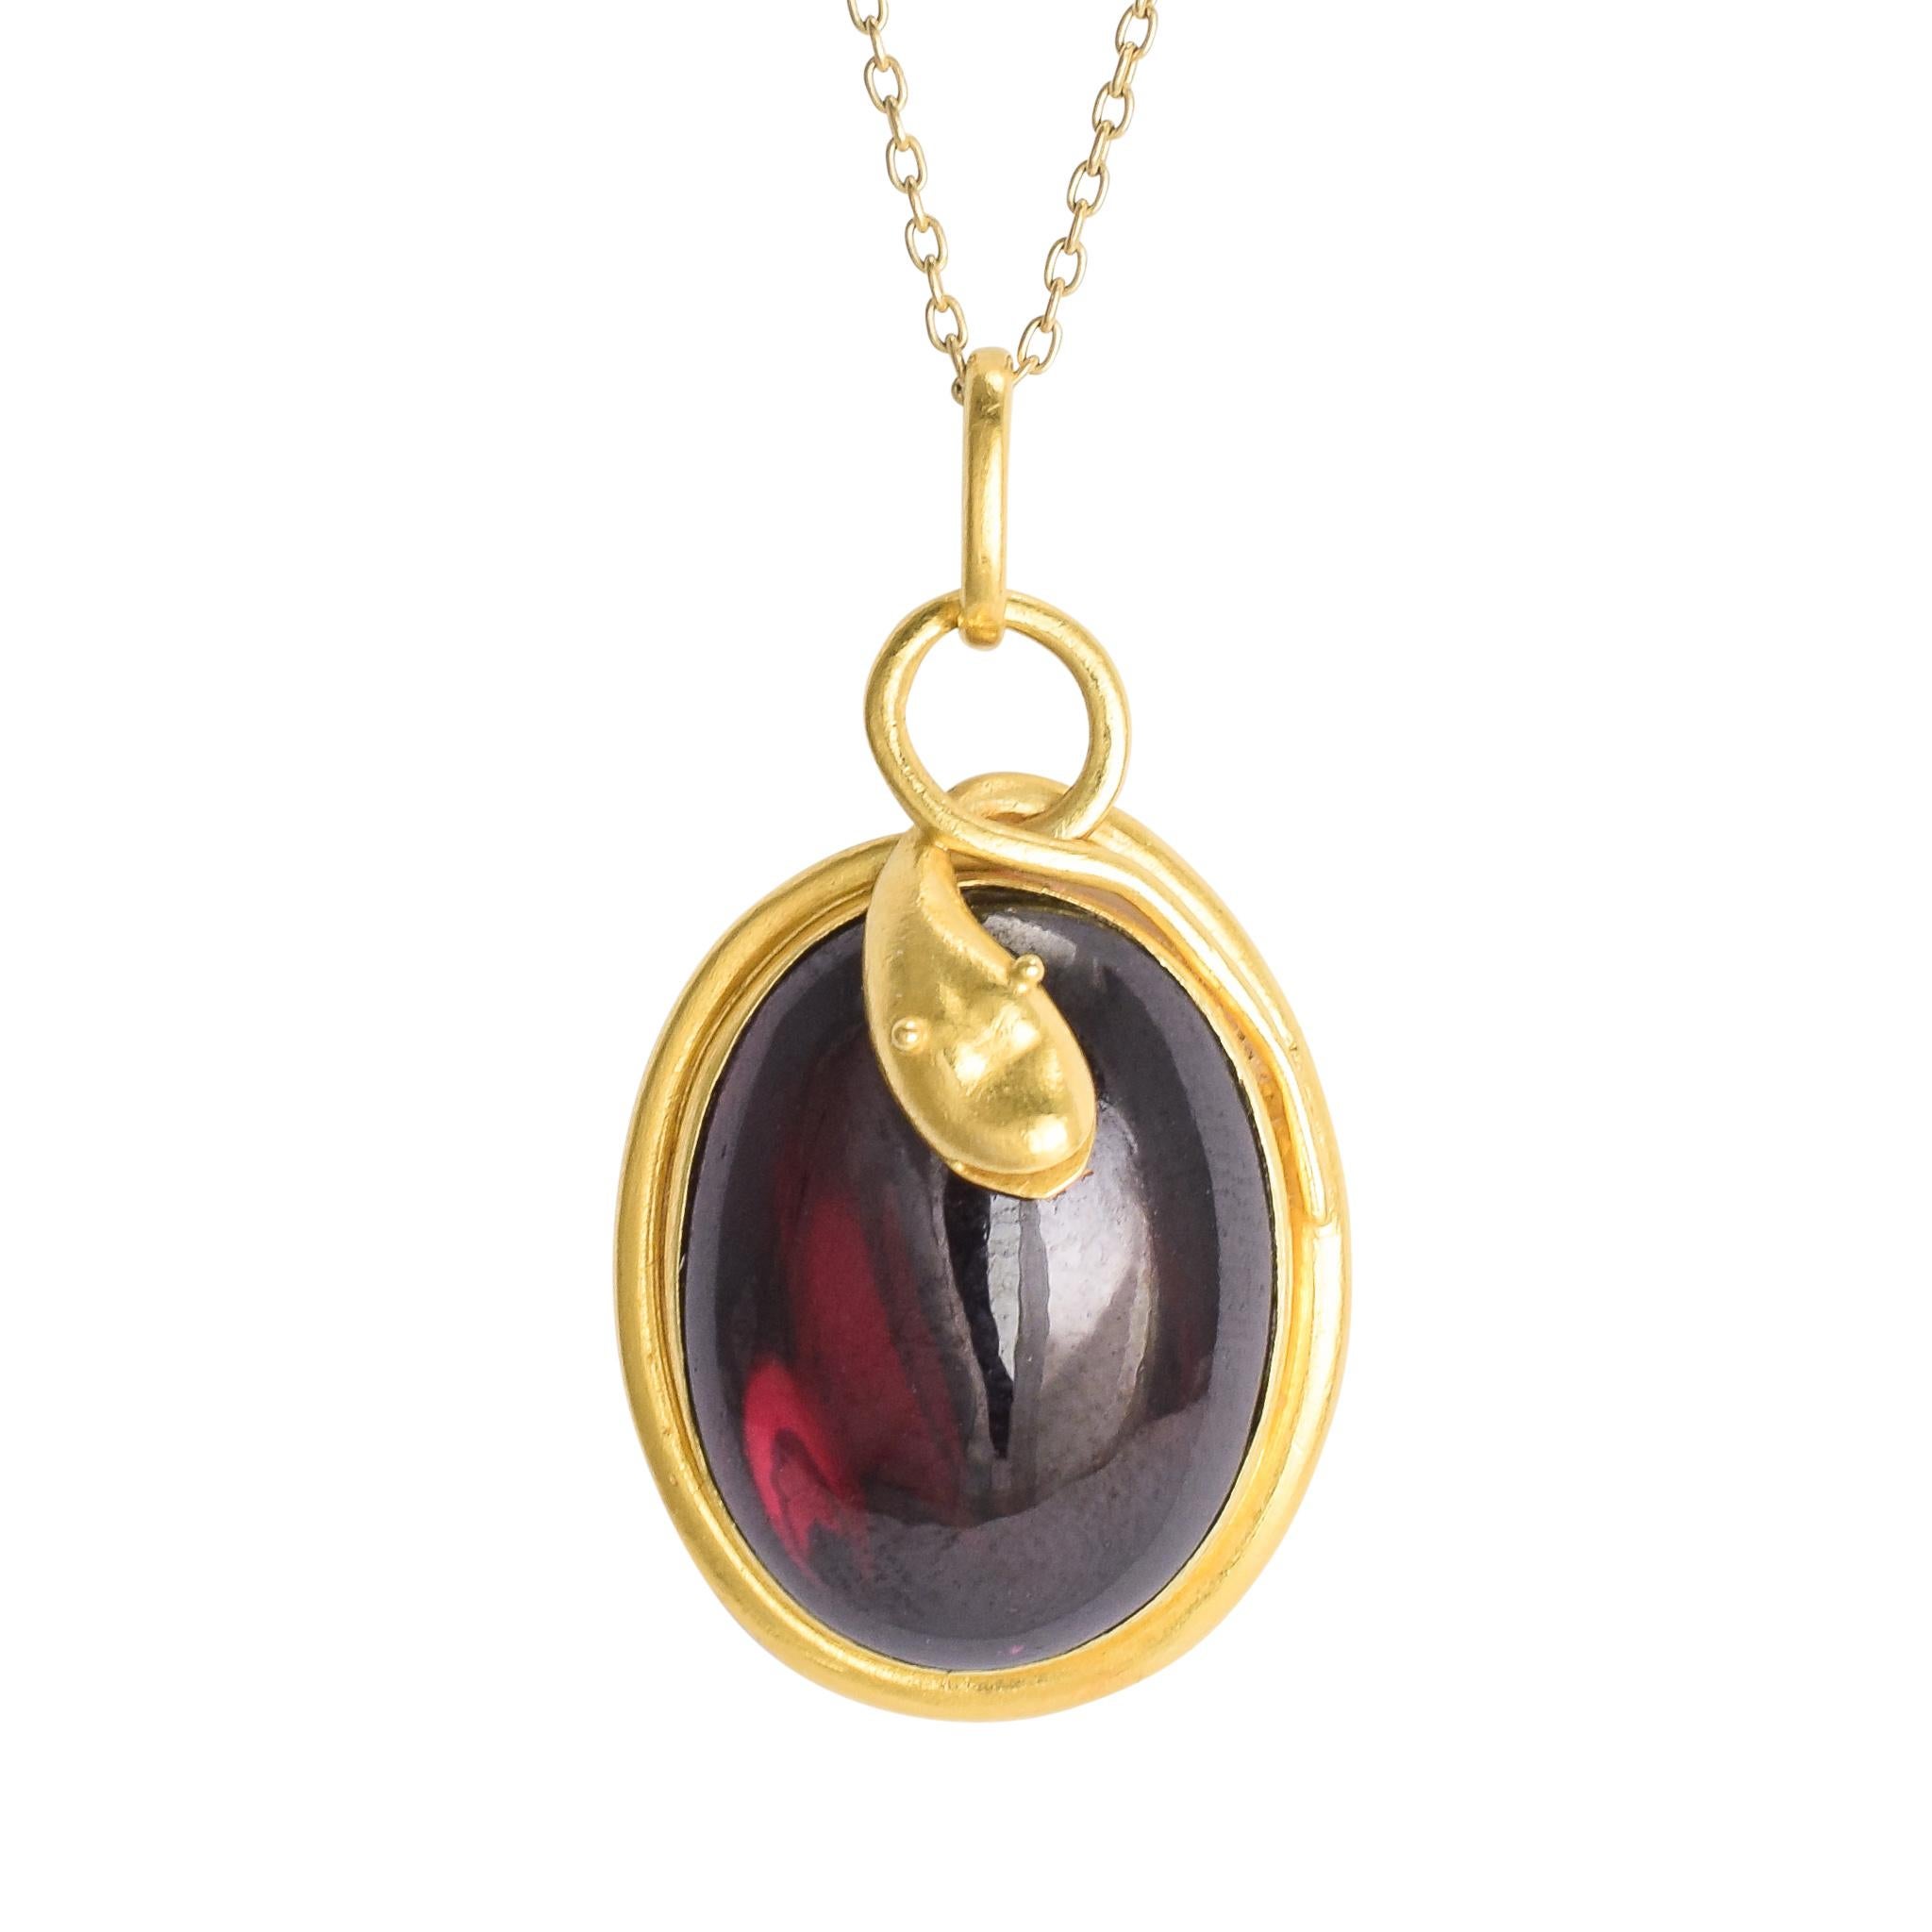 Antique Mid-Victorian Garnet and Snake Gold Pendant Necklace